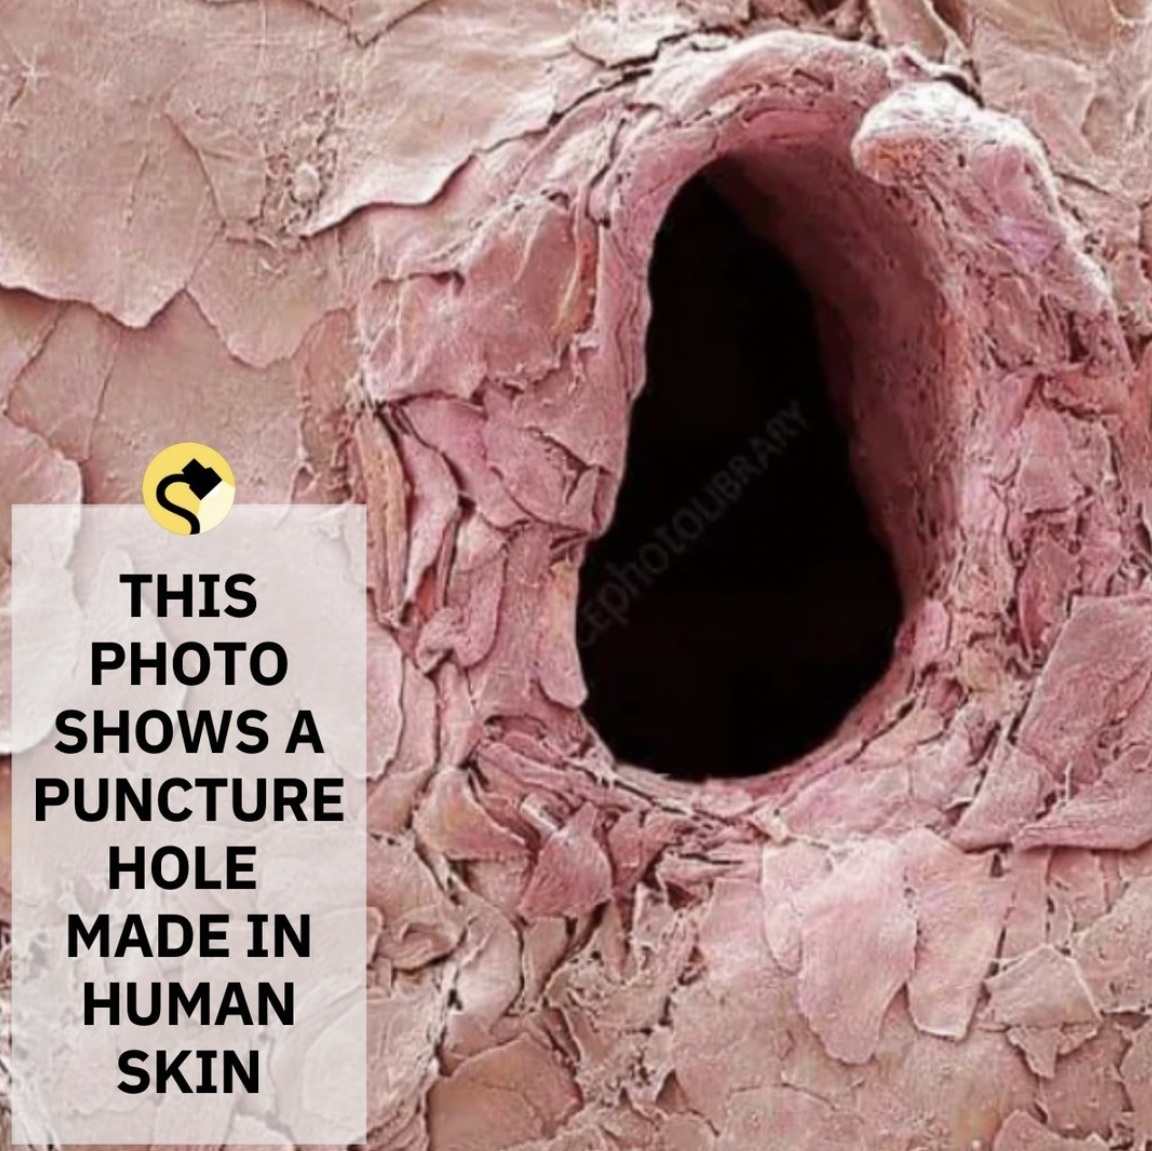 Snopes Facts - needle puncture - photoLIBRARY This Photo Shows A Puncture Hole Made In Human Skin